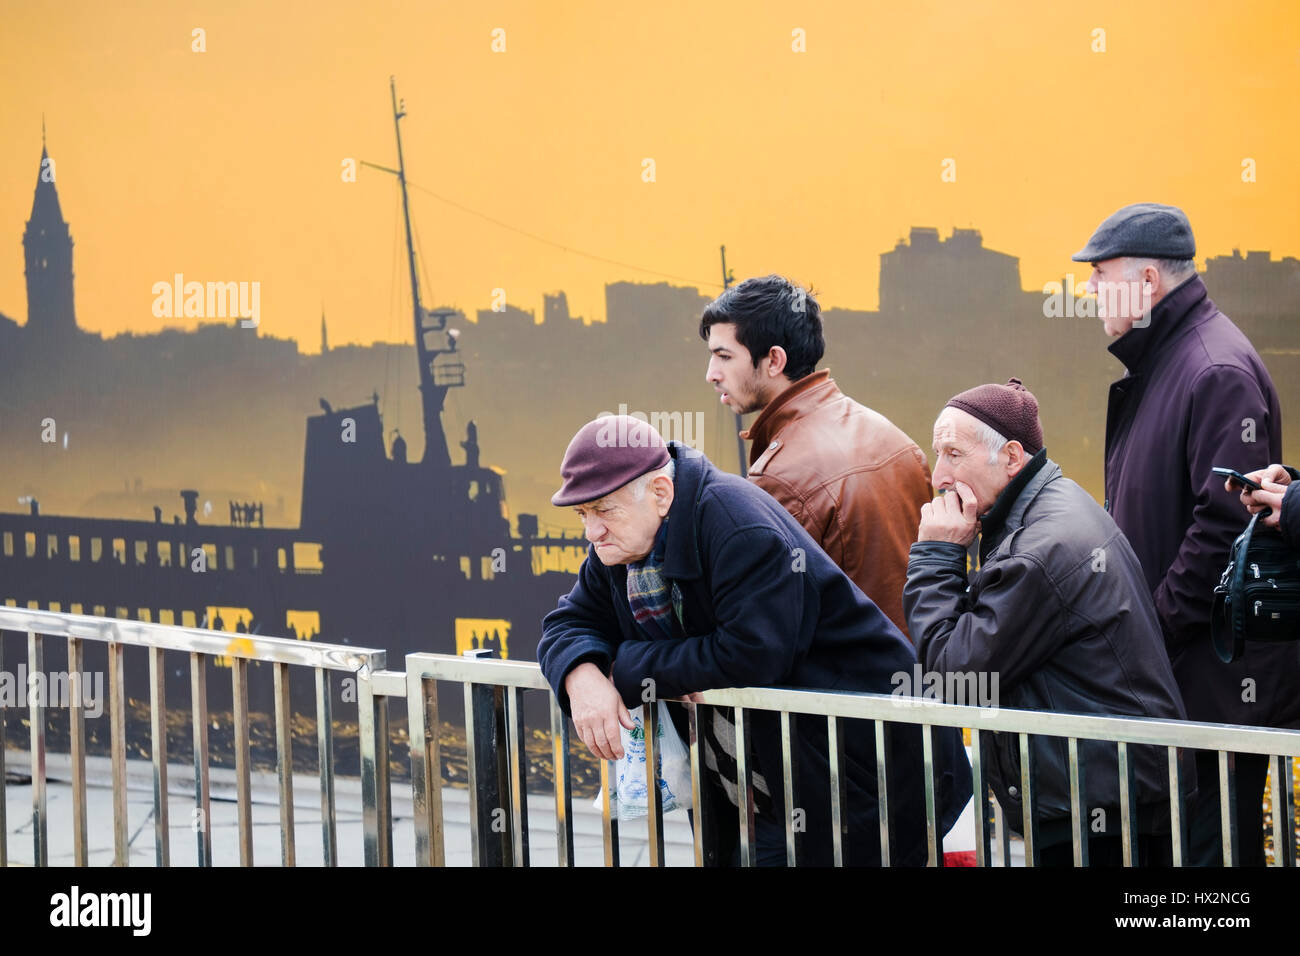 Istanbul, Turkey - February 19, 2017: Old and young Turkish Men is waiting for ship in front of an interesting poster at The Istanbul, Turkey Stock Photo